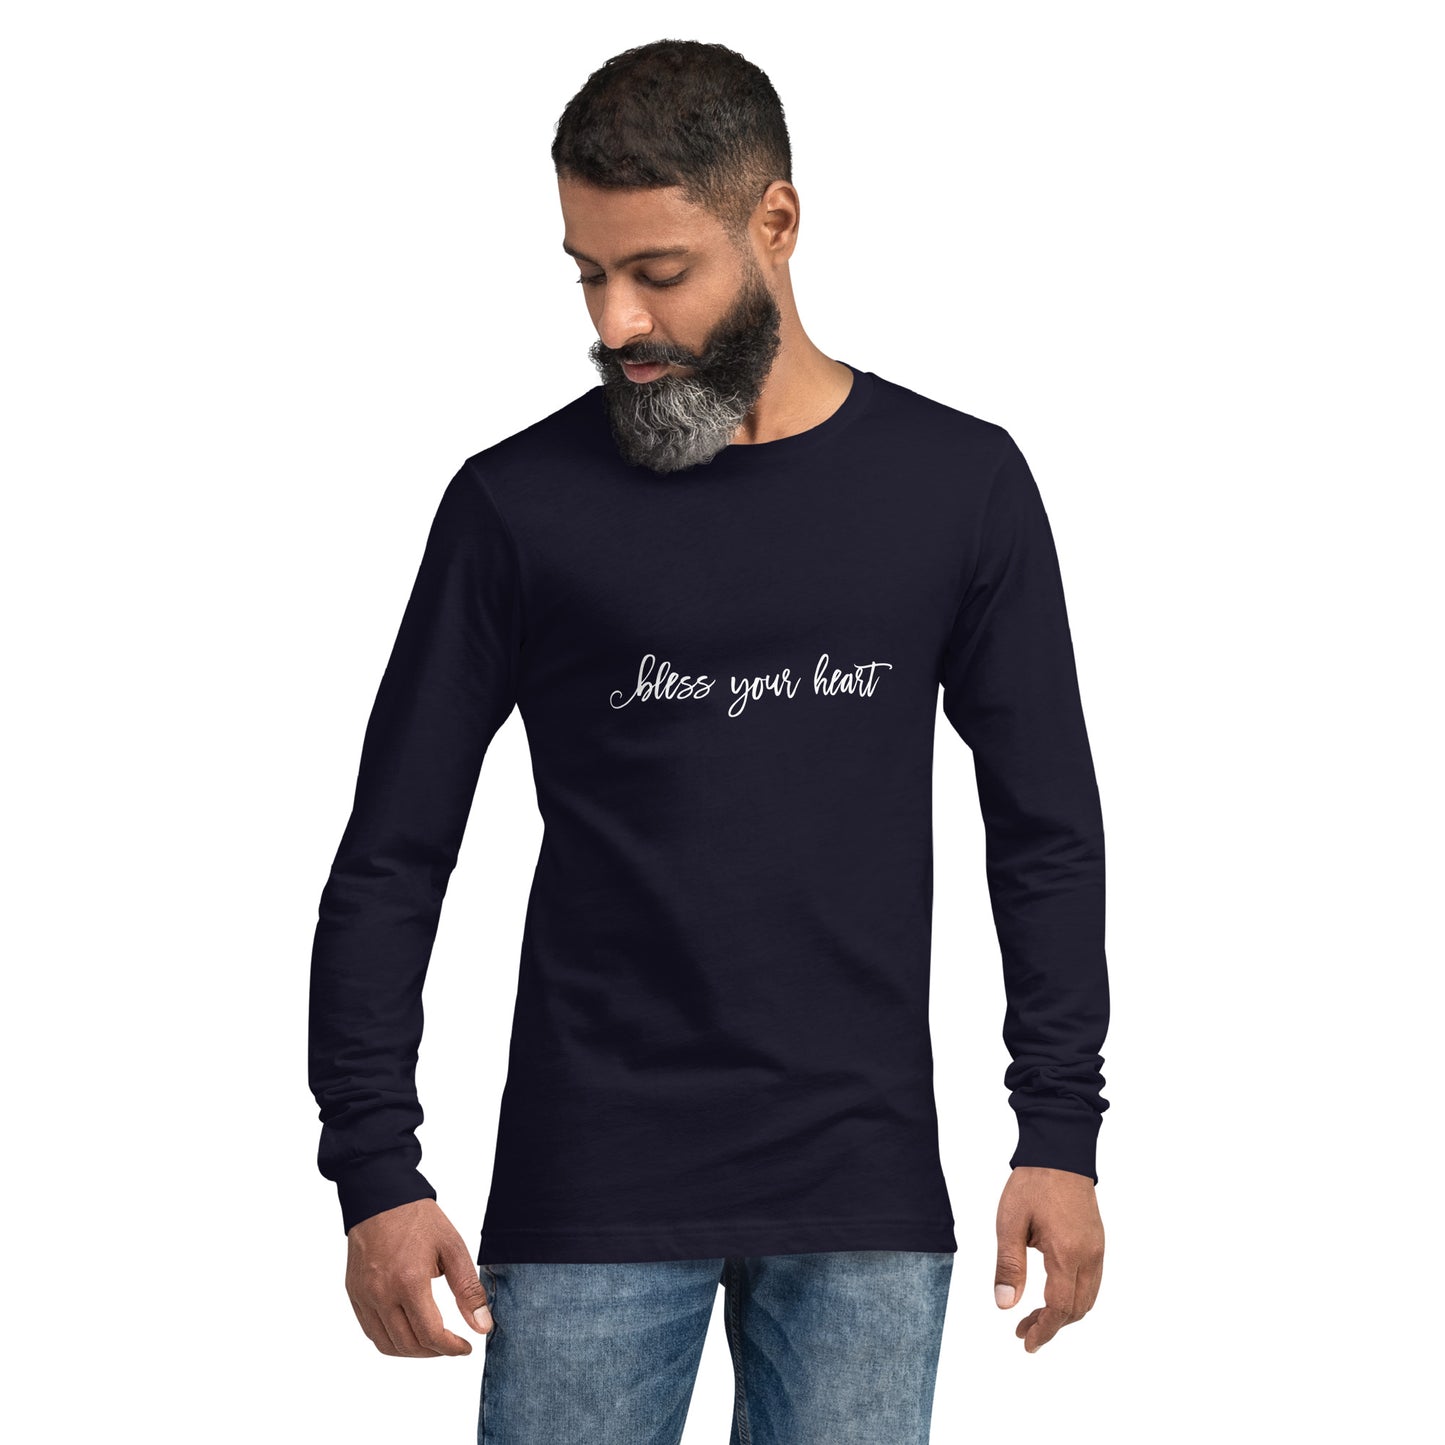 Model wearing Navy long-sleeve t-shirt with white graphic in an excessively twee font: "bless your heart"